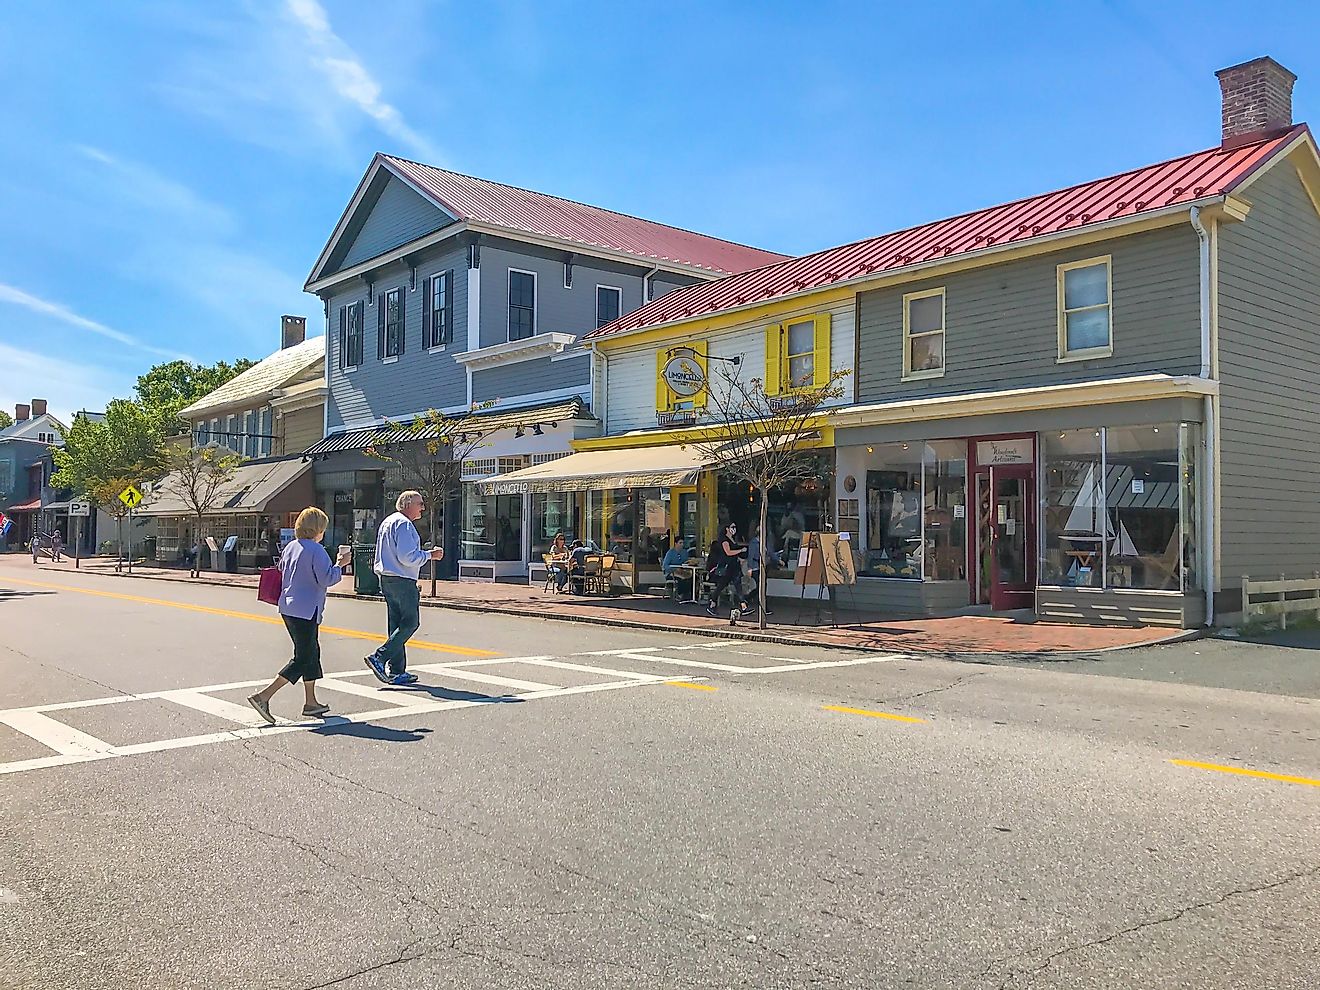 Downtown St. Michaels, Maryland. Image credit MeanderingMoments via Shutterstock.com